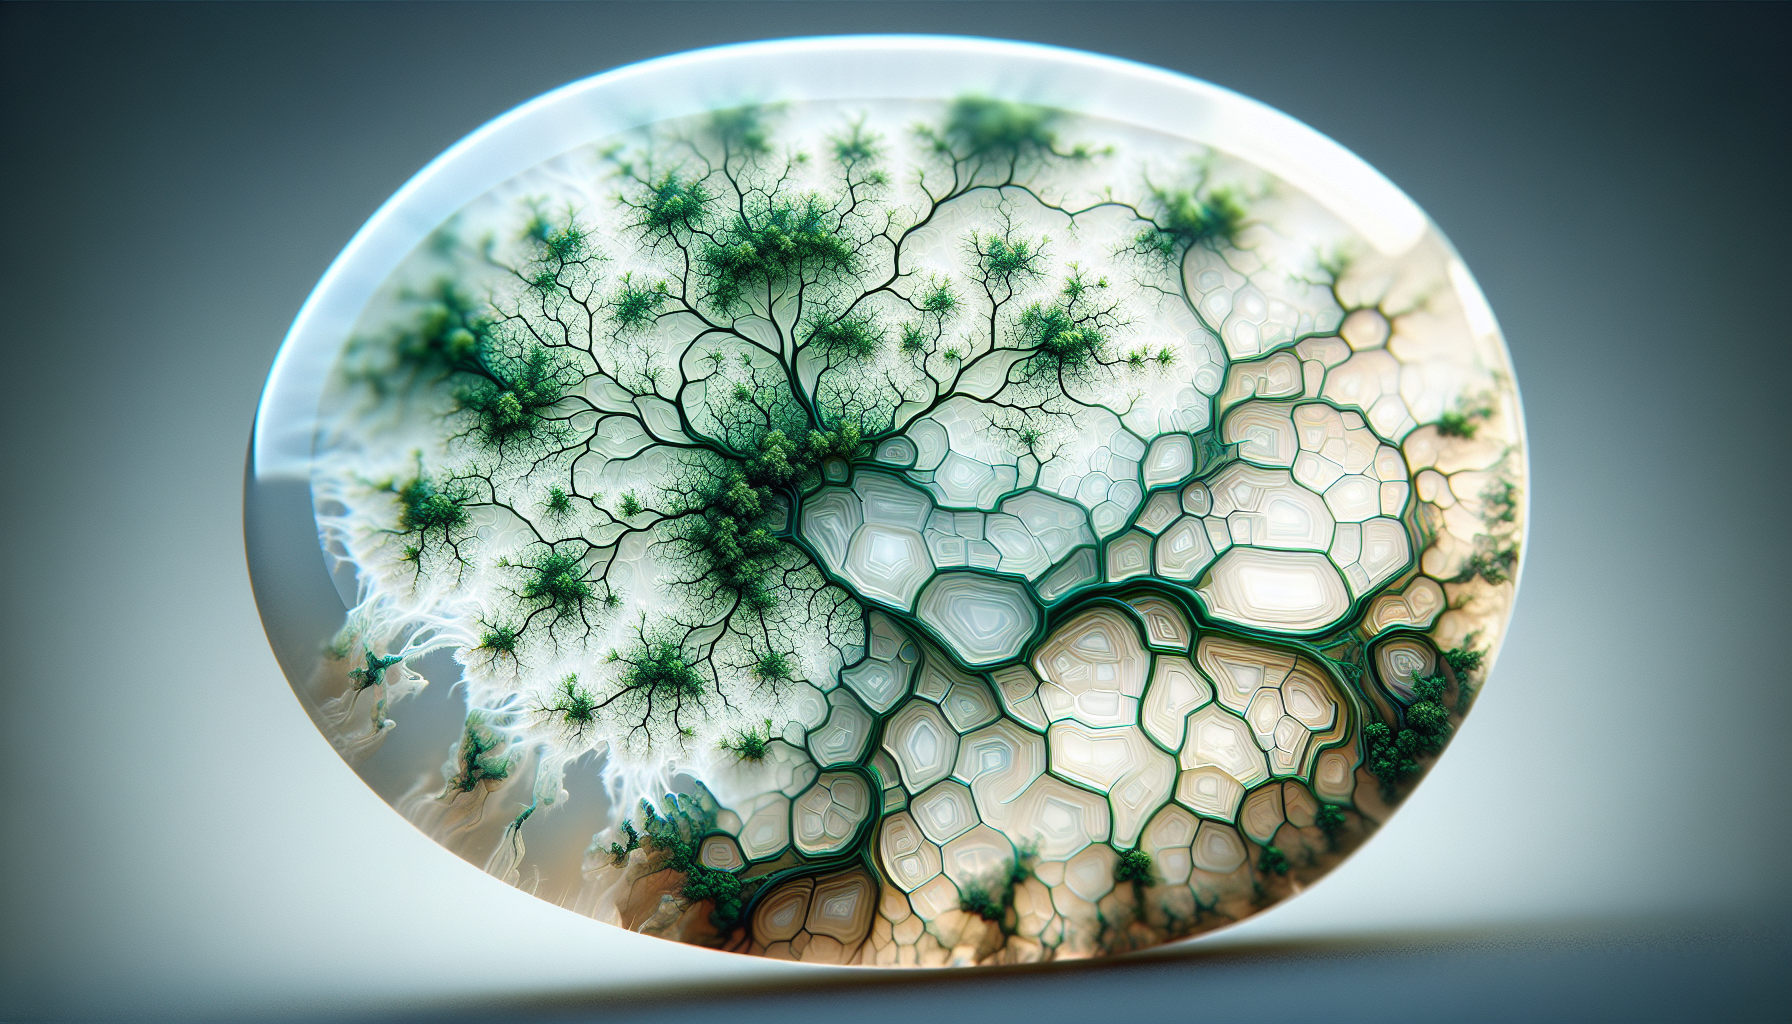 Illustration of a green dendritic pattern in a translucent stone